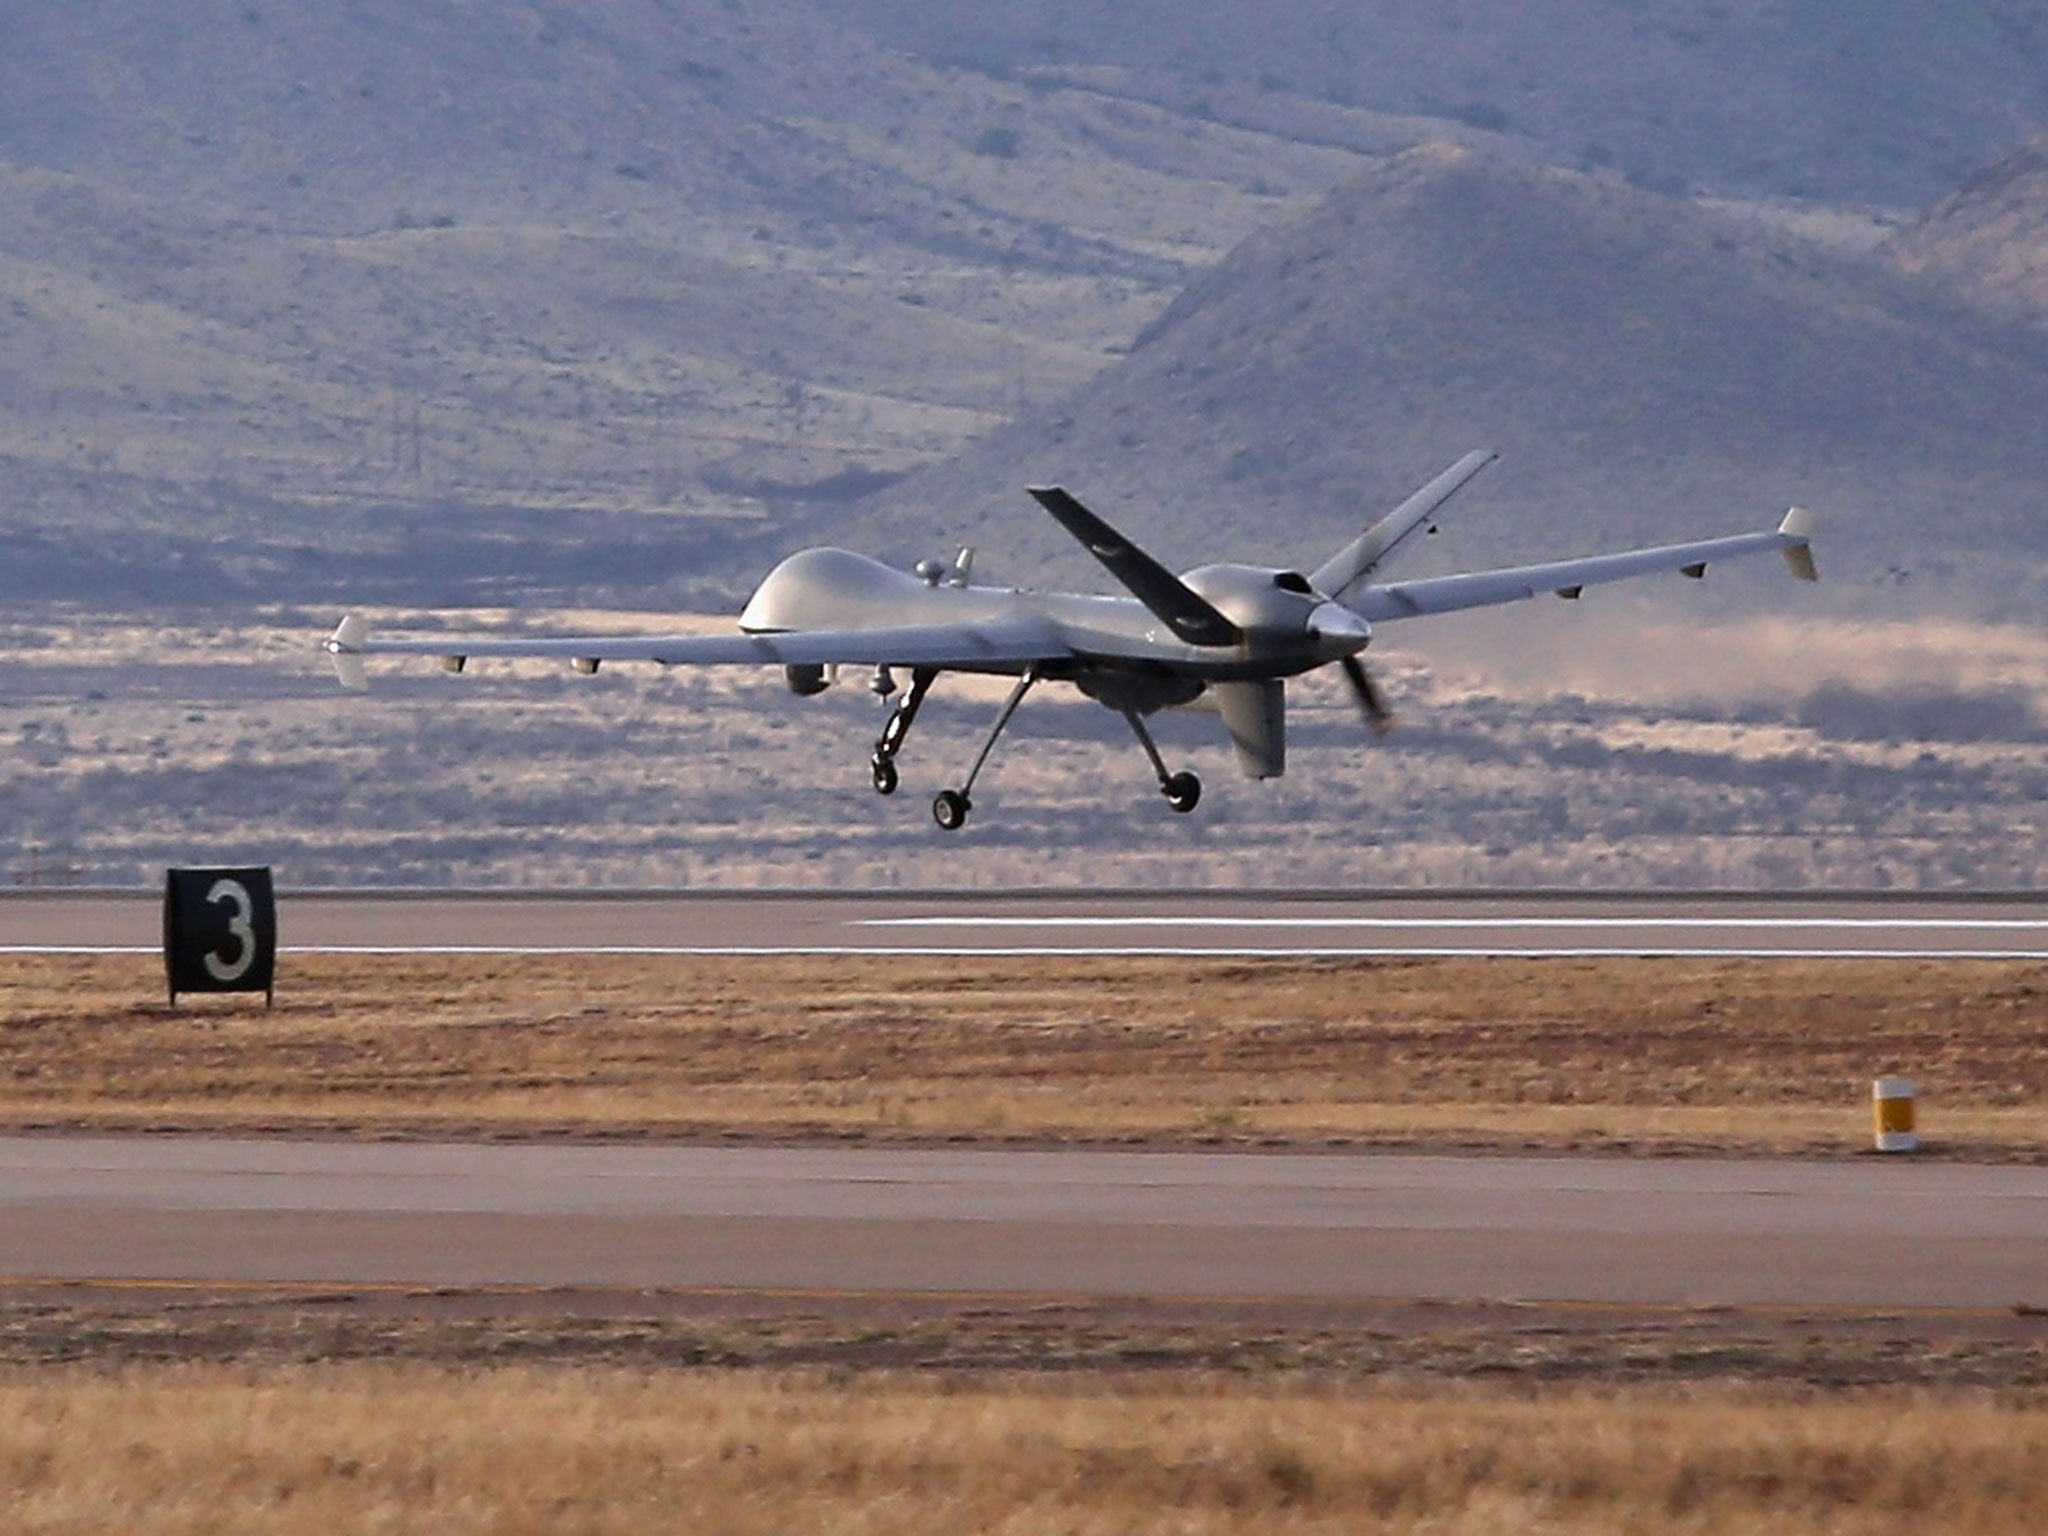 The new activity involves flying between 30 and 35 drone flights daily, some of them armed with air-to-surface missiles